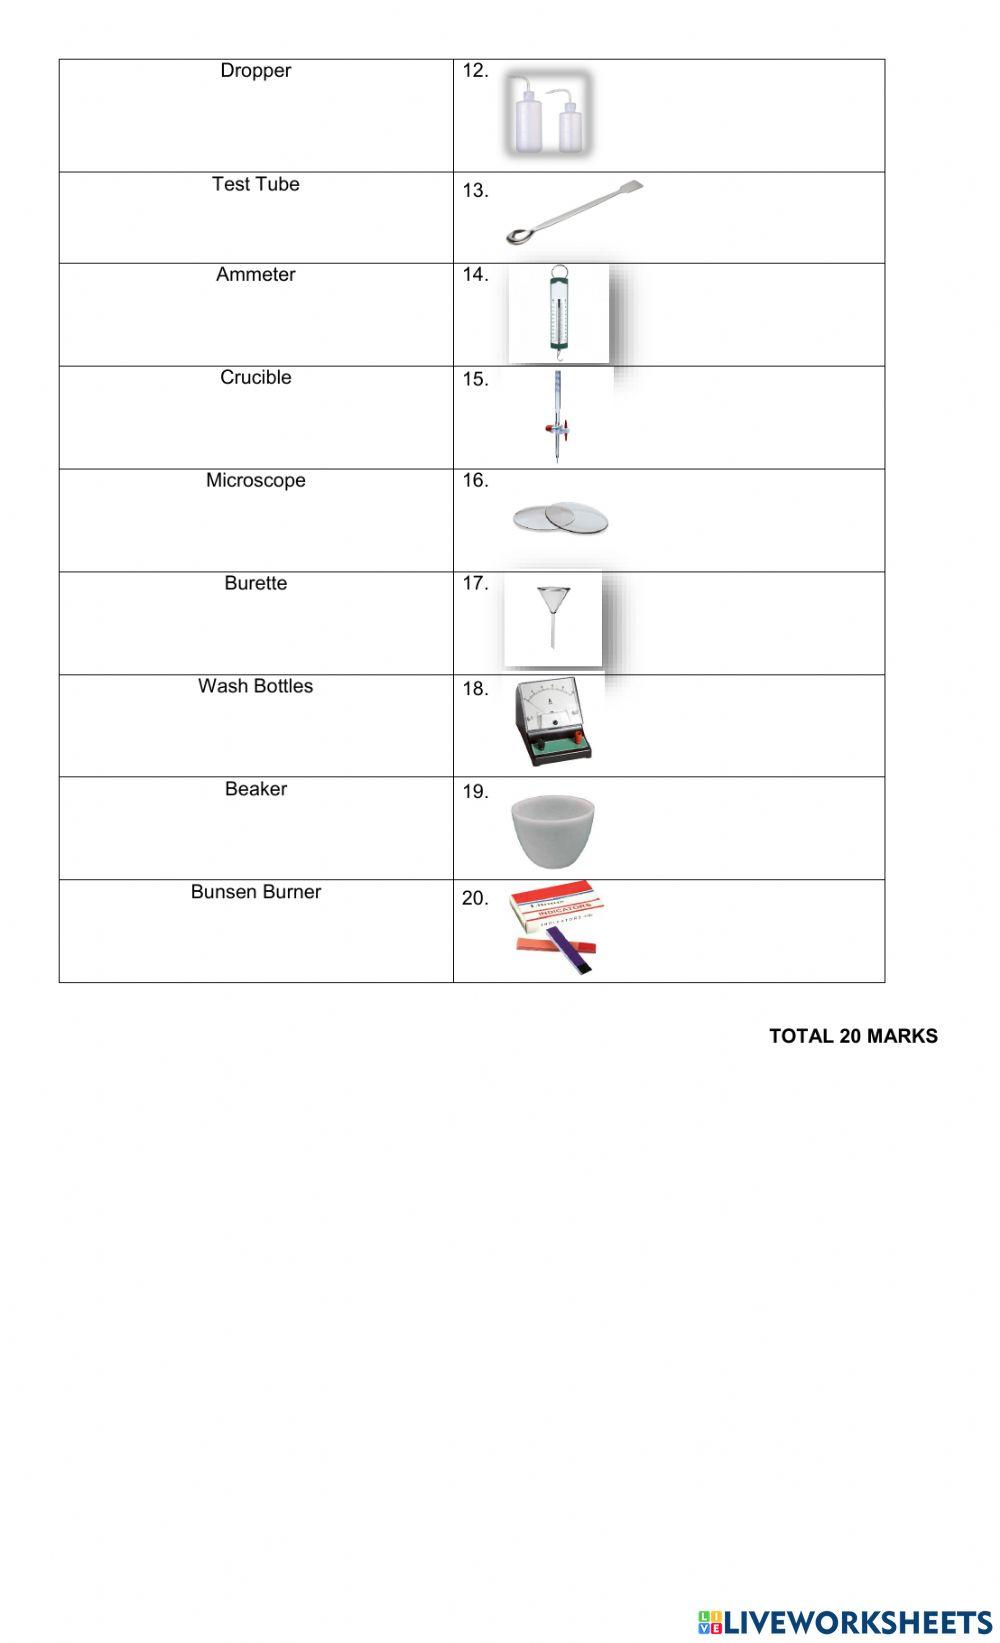 Common Apparatus used in a science lab - Matching Worksheet